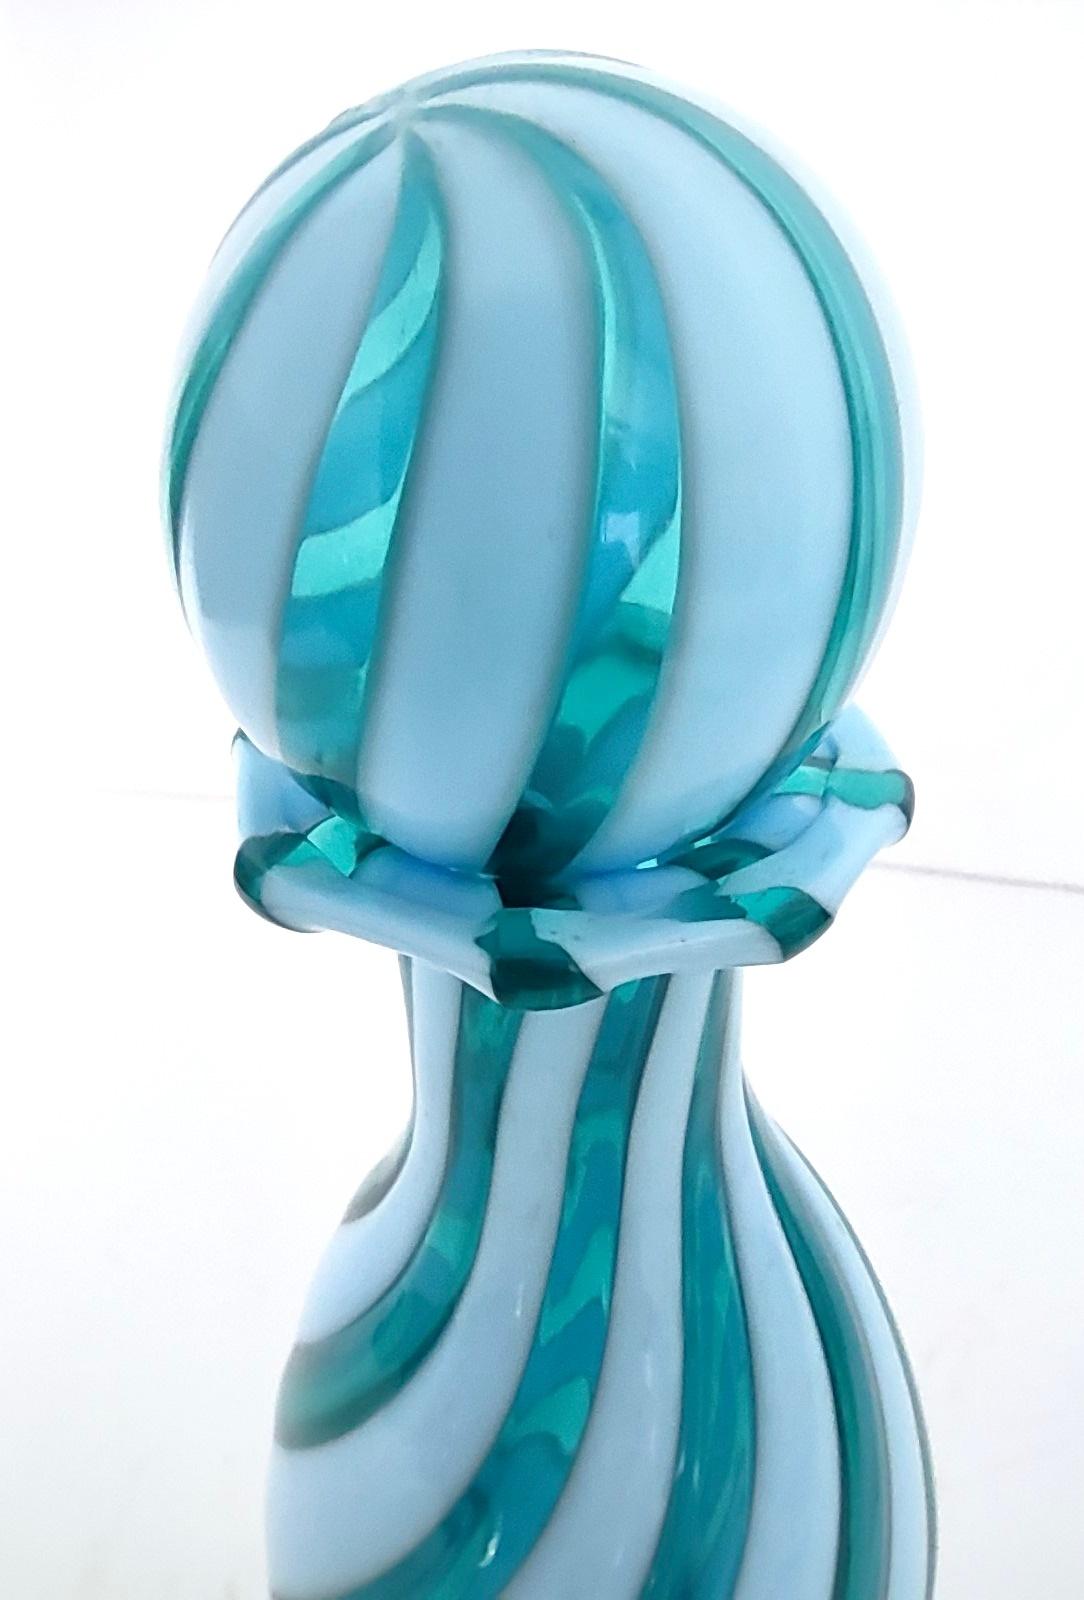 Murano Glass Decanter Ascribable to Toso with Teal and White Canes, Italy 1